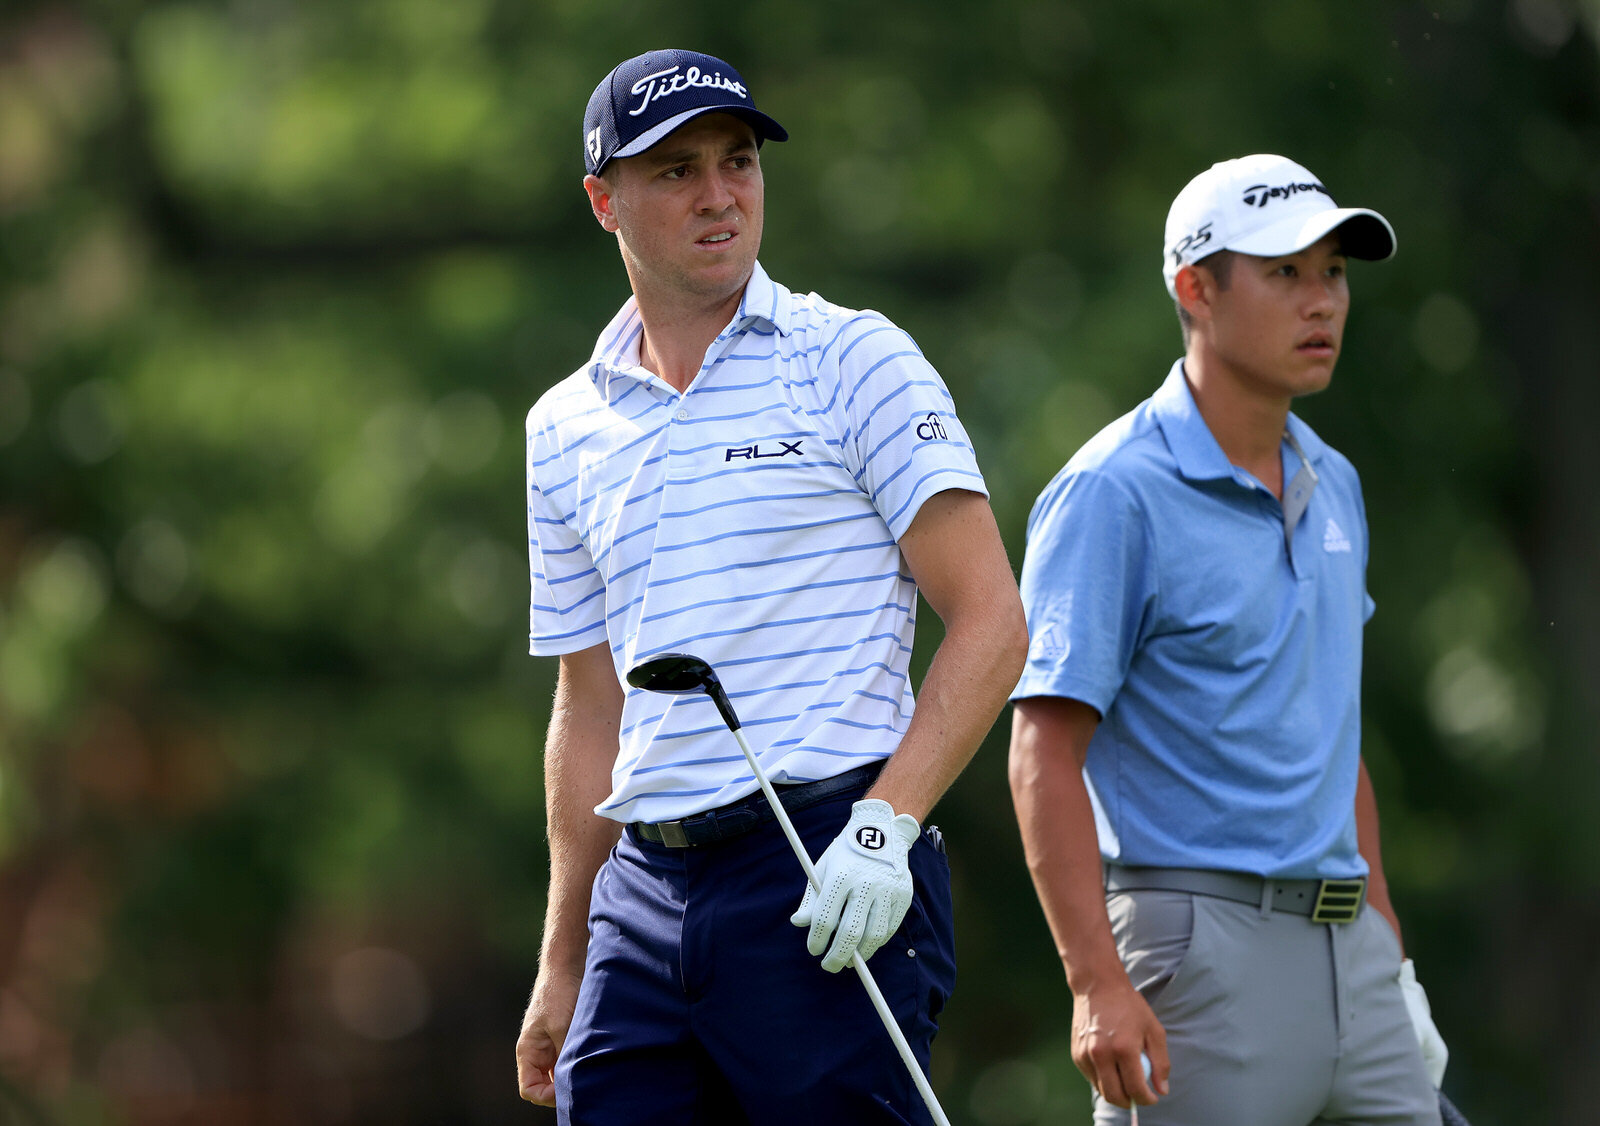  DUBLIN, OHIO - JULY 11: Justin Thomas of the United States and Collin Morikawa of the United States look on from the 18th tee during the third round of the Workday Charity Open on July 11, 2020 at Muirfield Village Golf Club in Dublin, Ohio. (Photo 